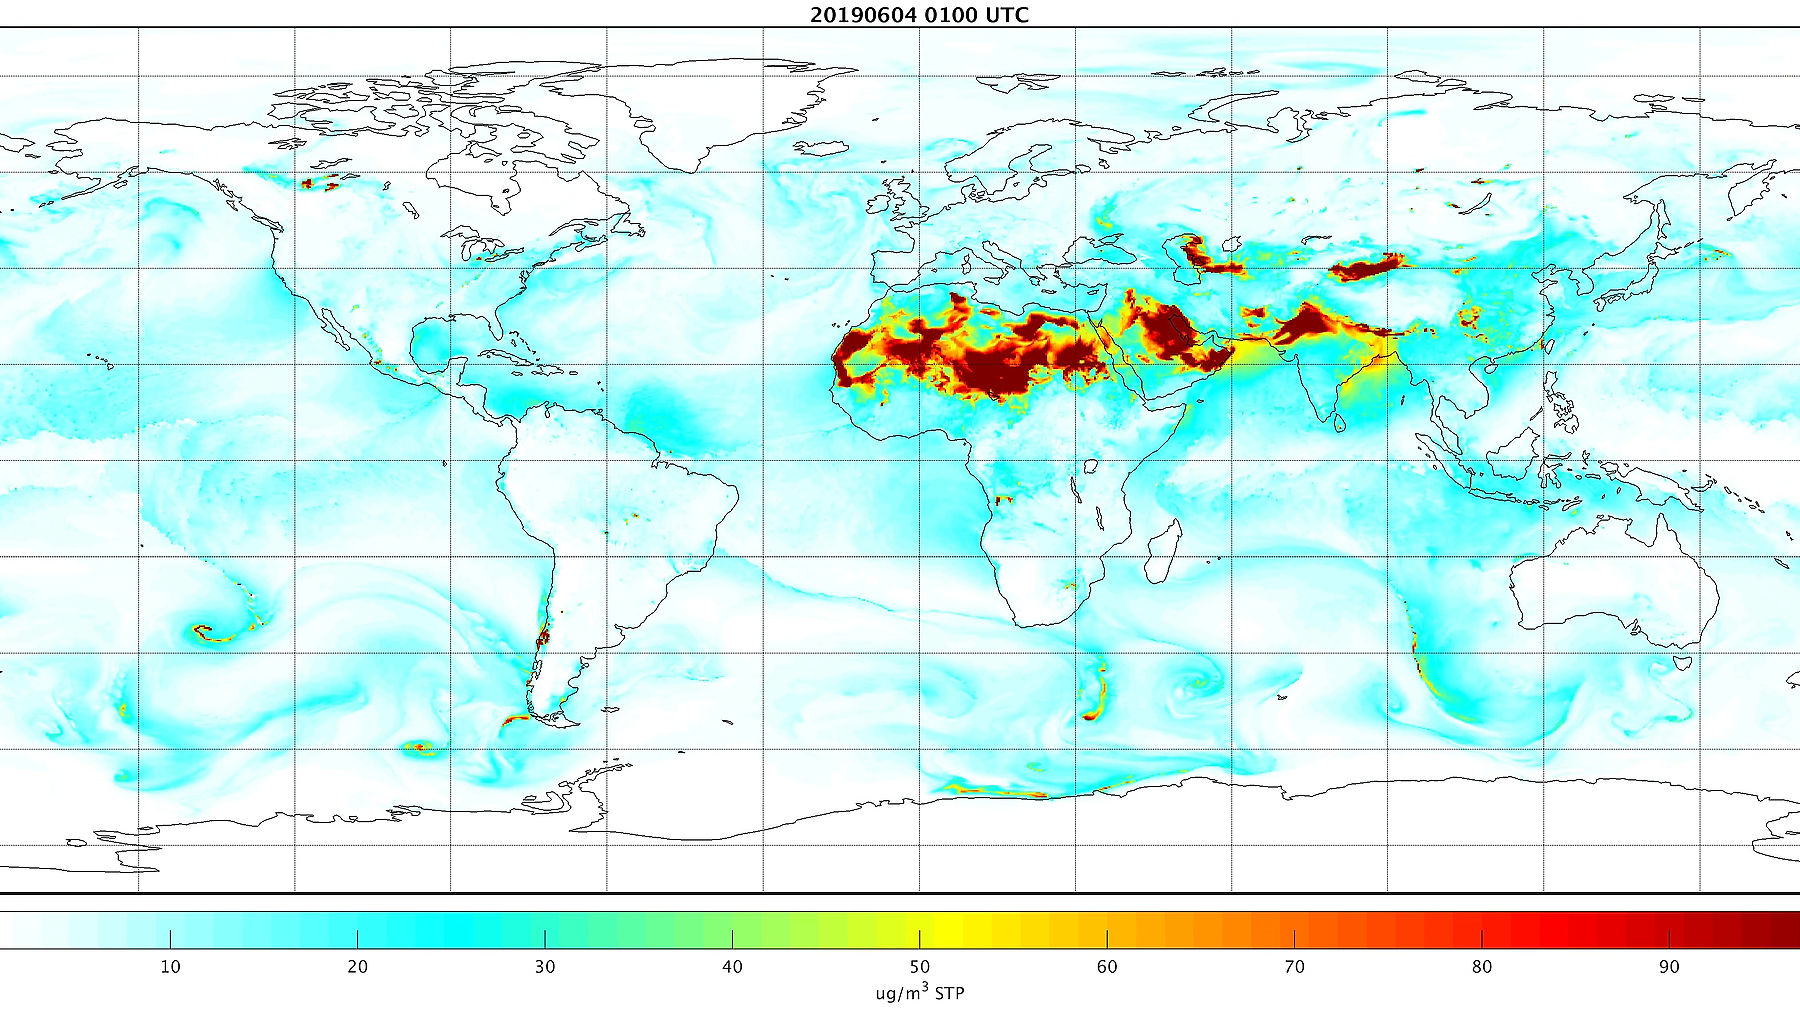 NASA GEOS-CF global forcast for total PM2.5